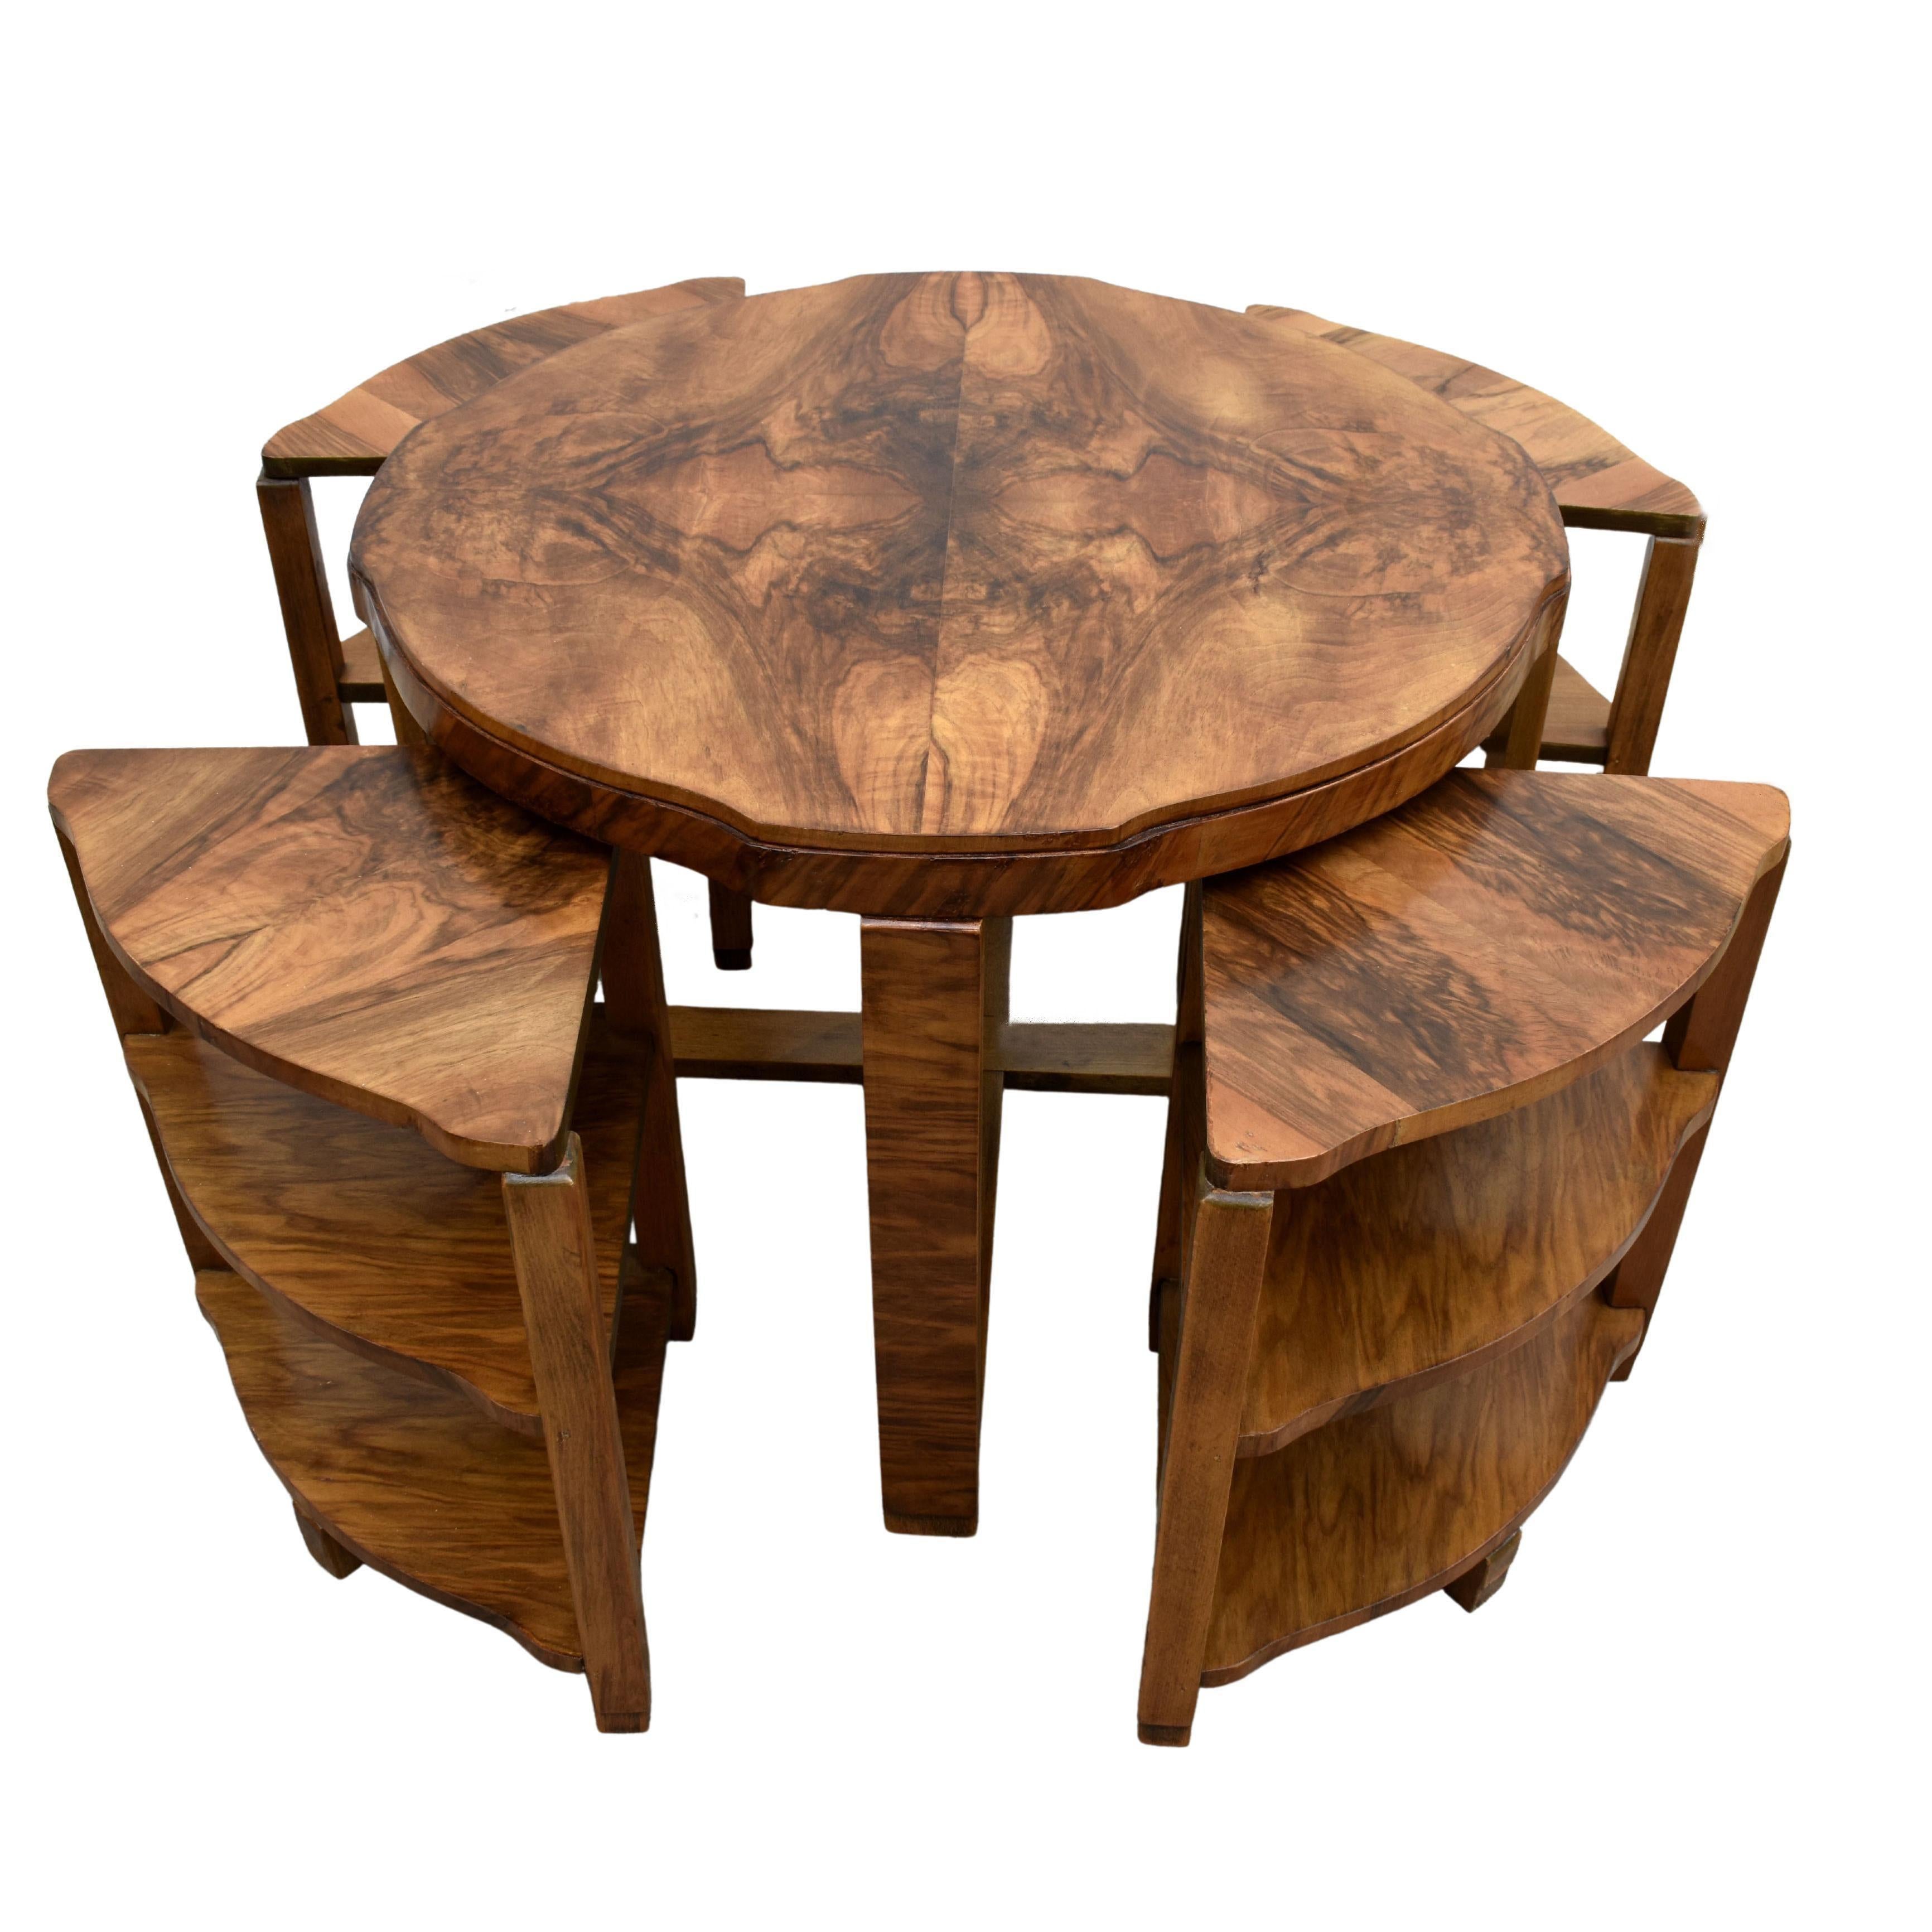 This is a beautiful and original 1930's Art Deco set of five tables in Burr Walnut. This gorgeous set comprises one large central circular table with four matching sectional tables that are two tiered that fit very snugly underneath. As you can see